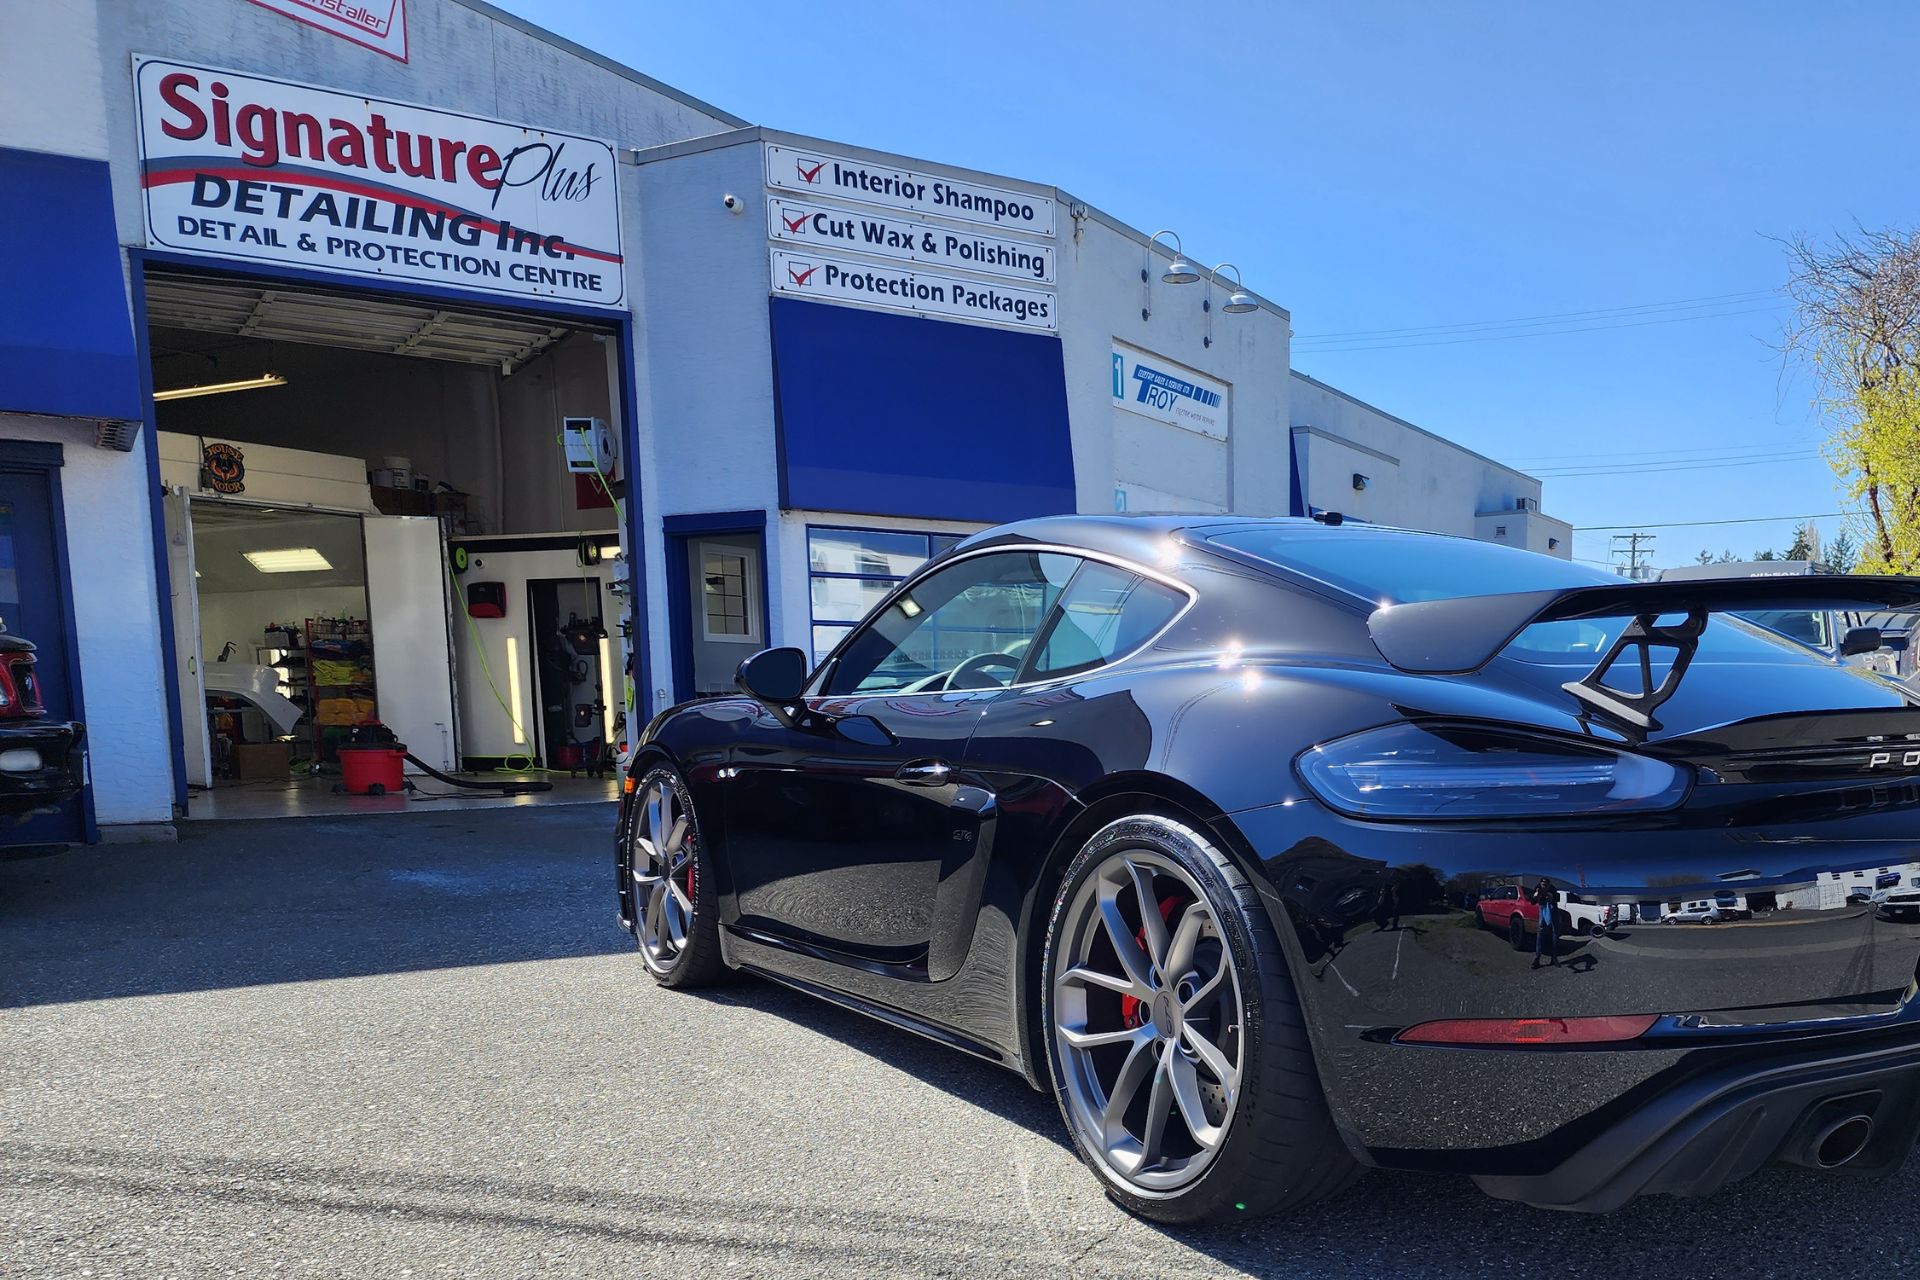 Signature Detailing in Victoria B.C Automotive Detailing and Paint Protection Services